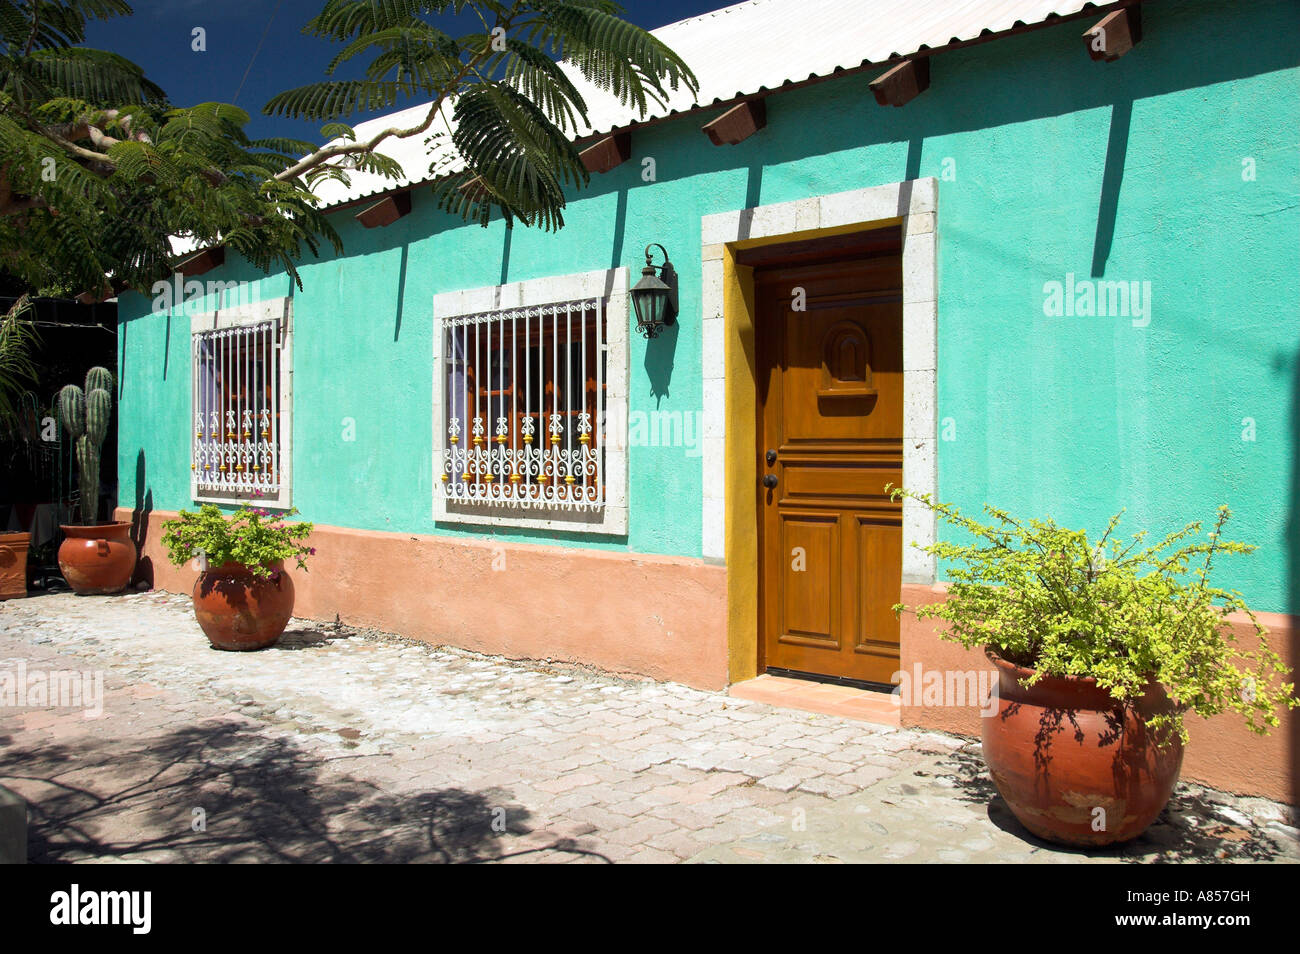 The streets and shopping areas of Loreto Mexico Stock Photo